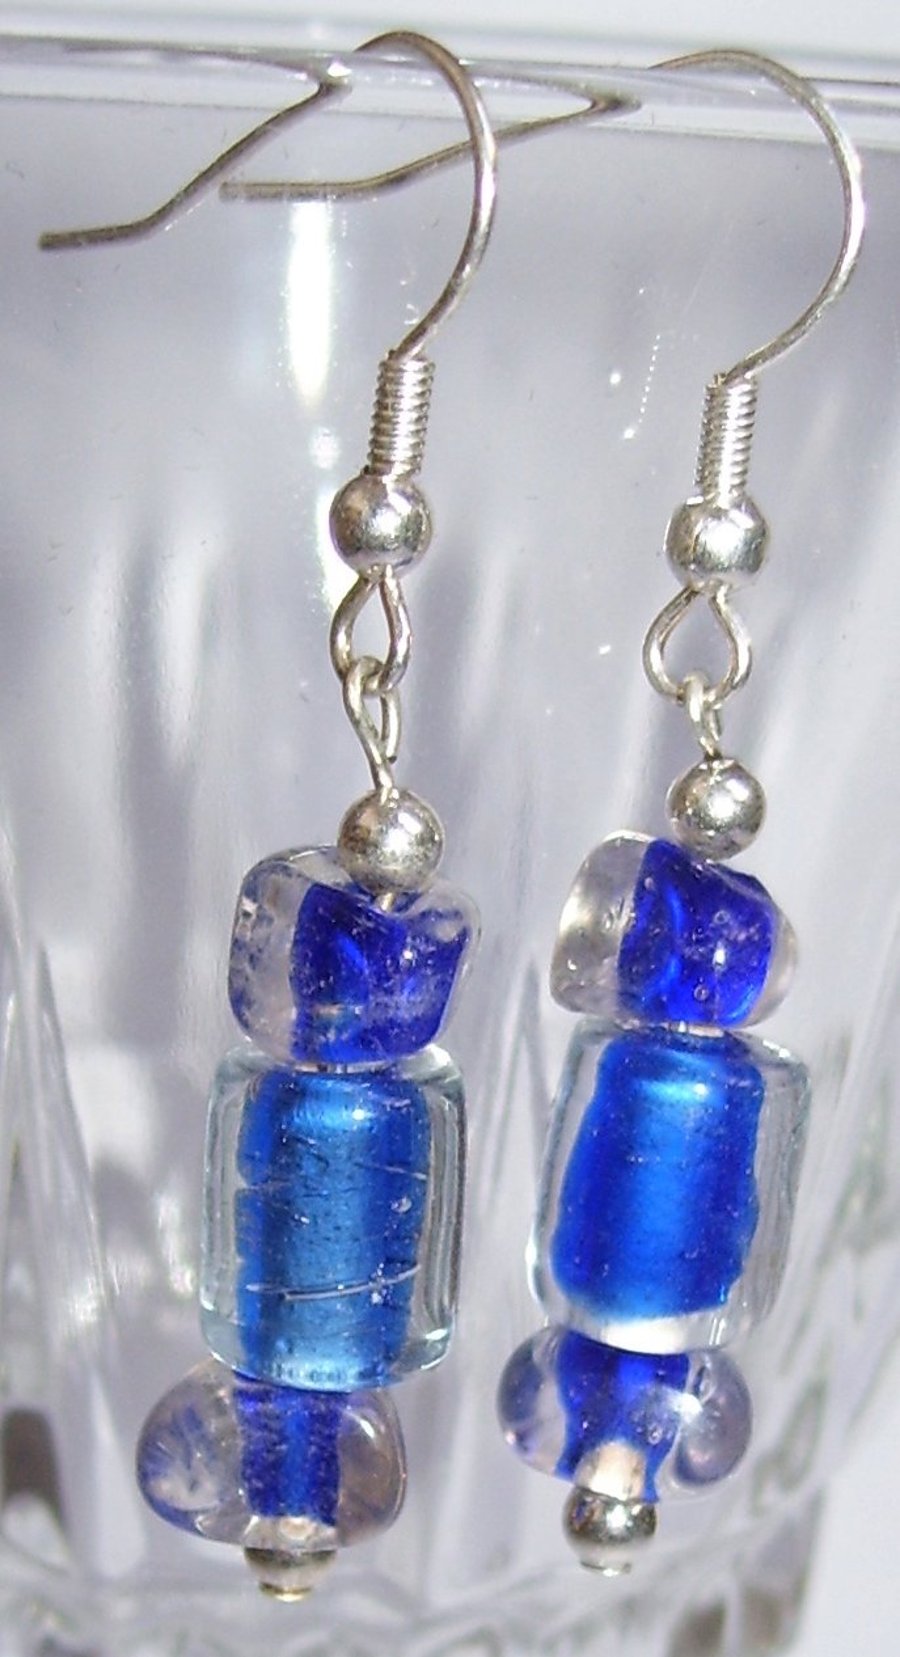 Blue and clear glass earrings